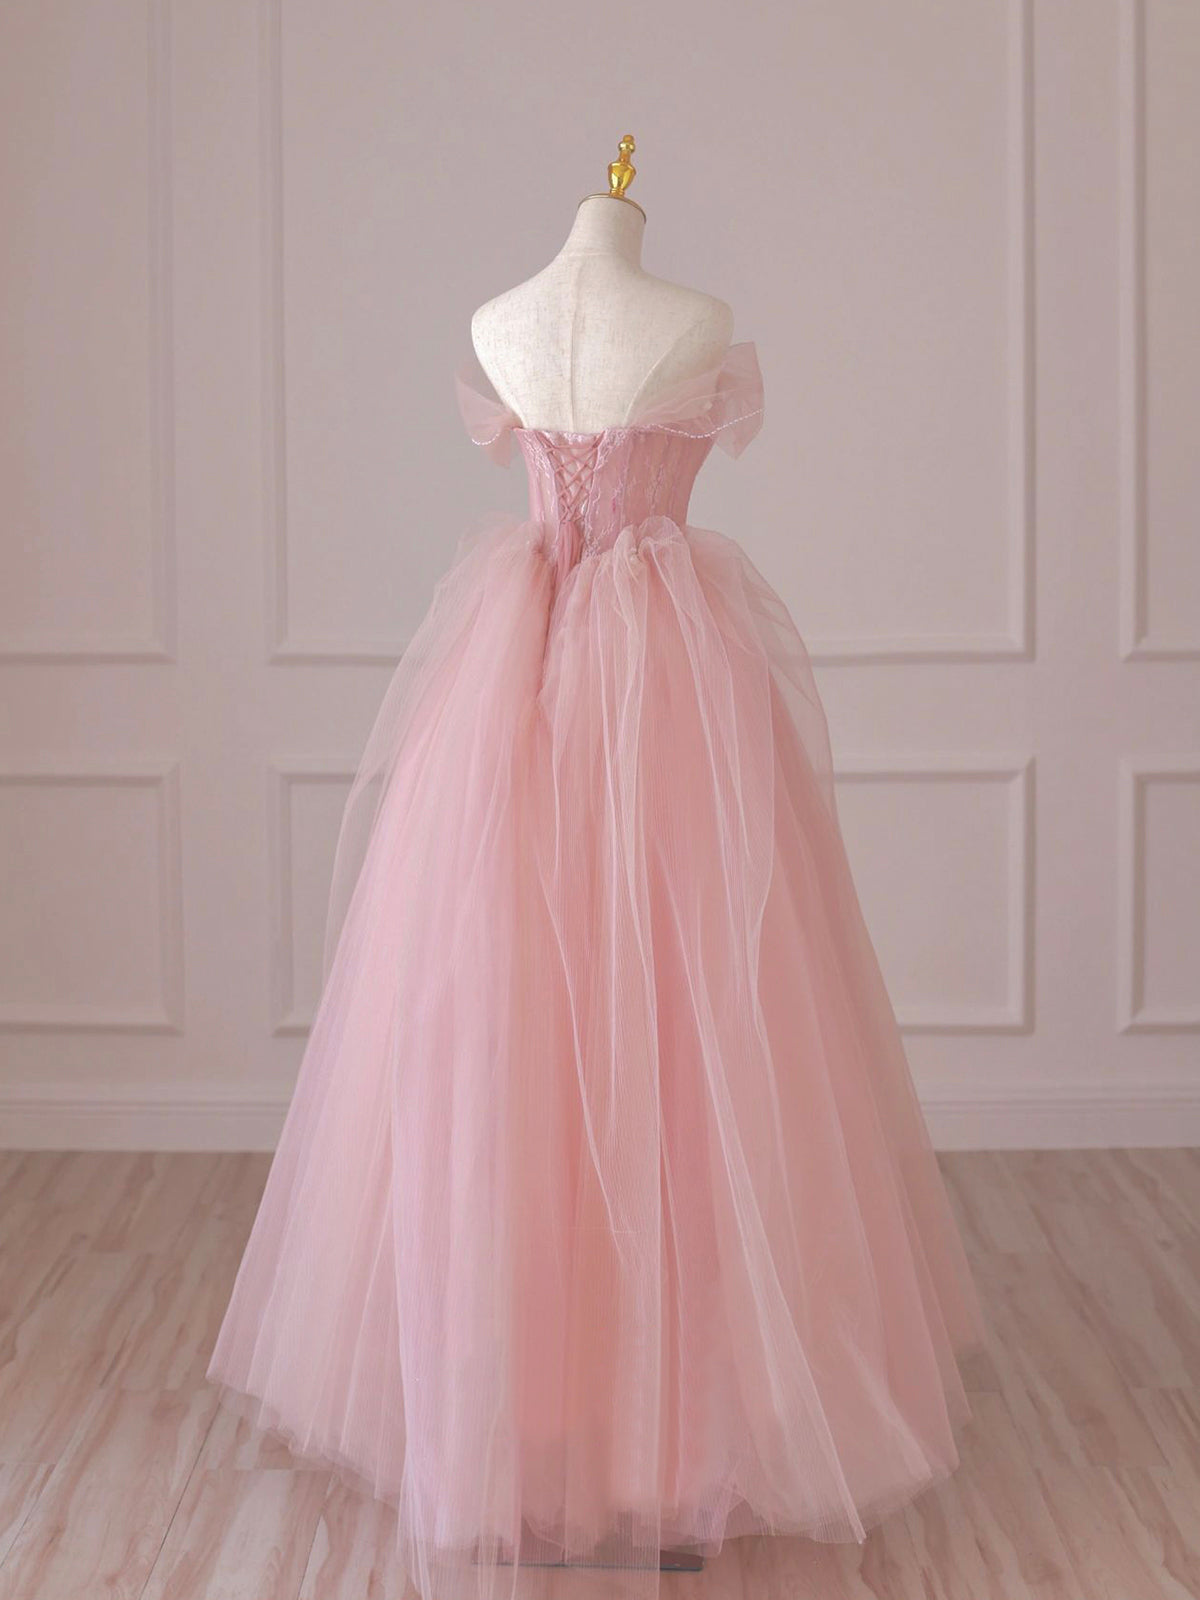 Homecoming Dresses Pockets, Pink Tulle Lace Long Prom Dress, Off the Shoulder Evening Dress